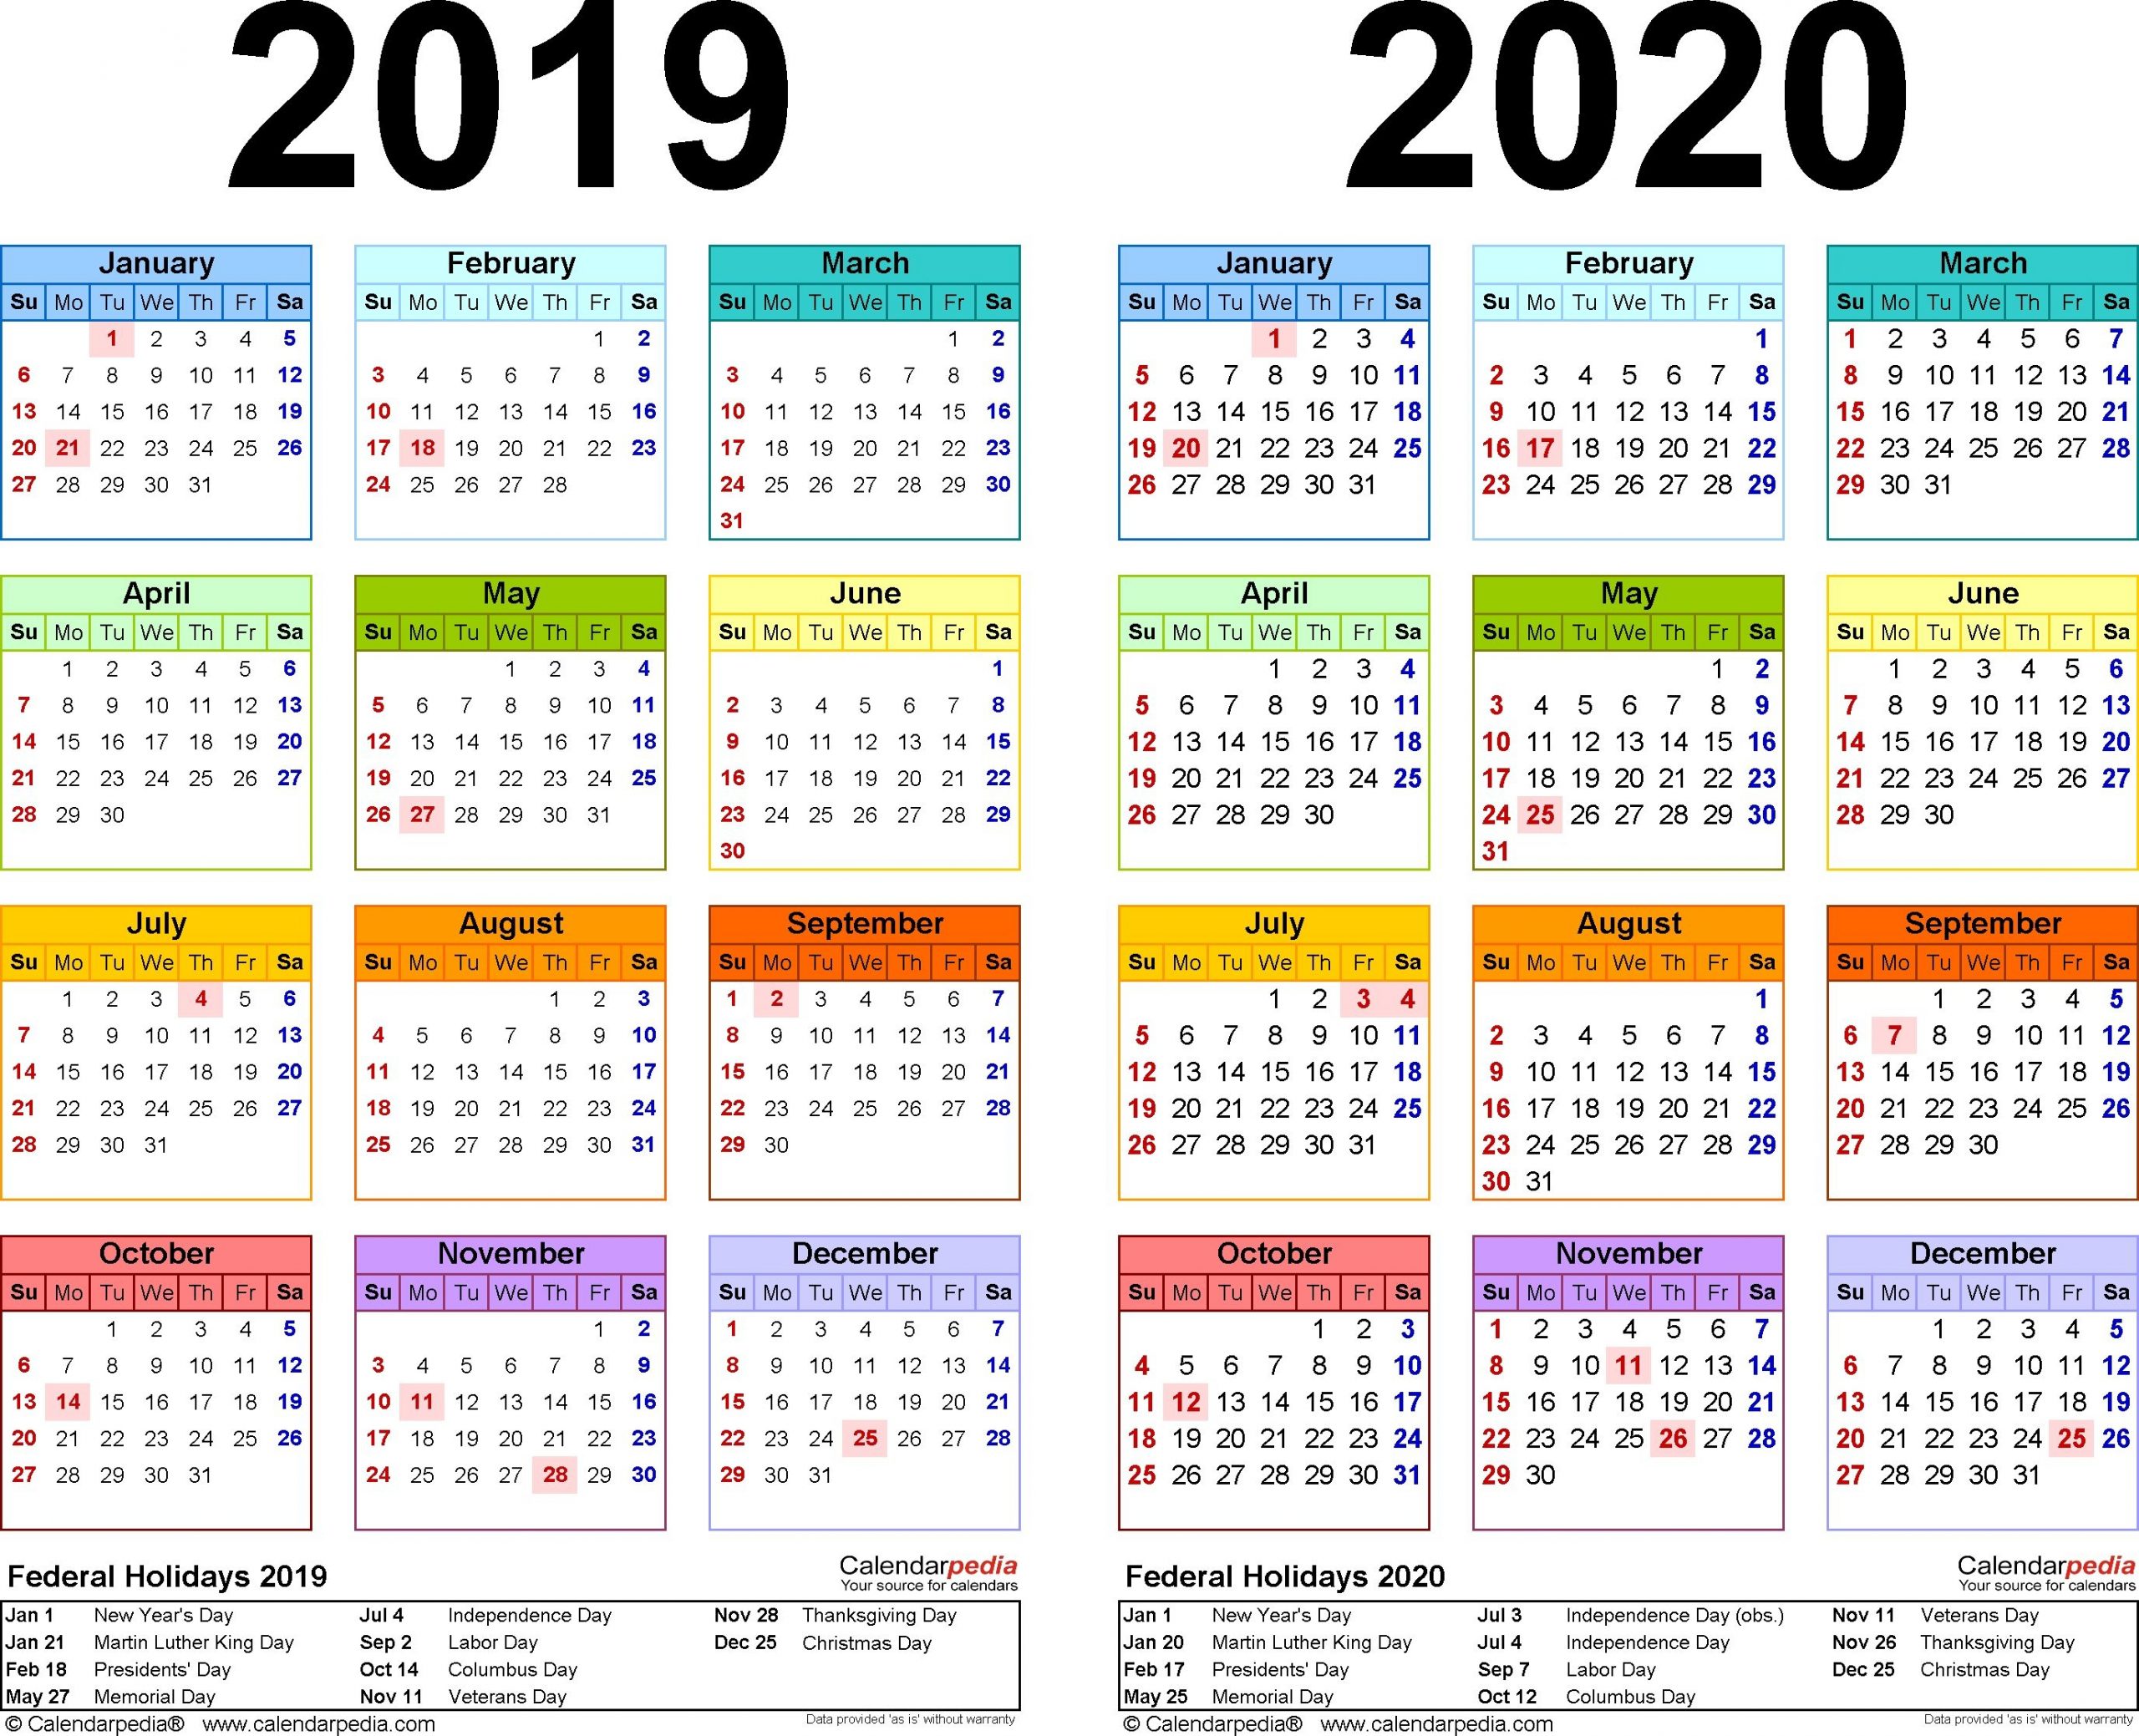 Appointments Calendar 2020 - Togo.wpart.co